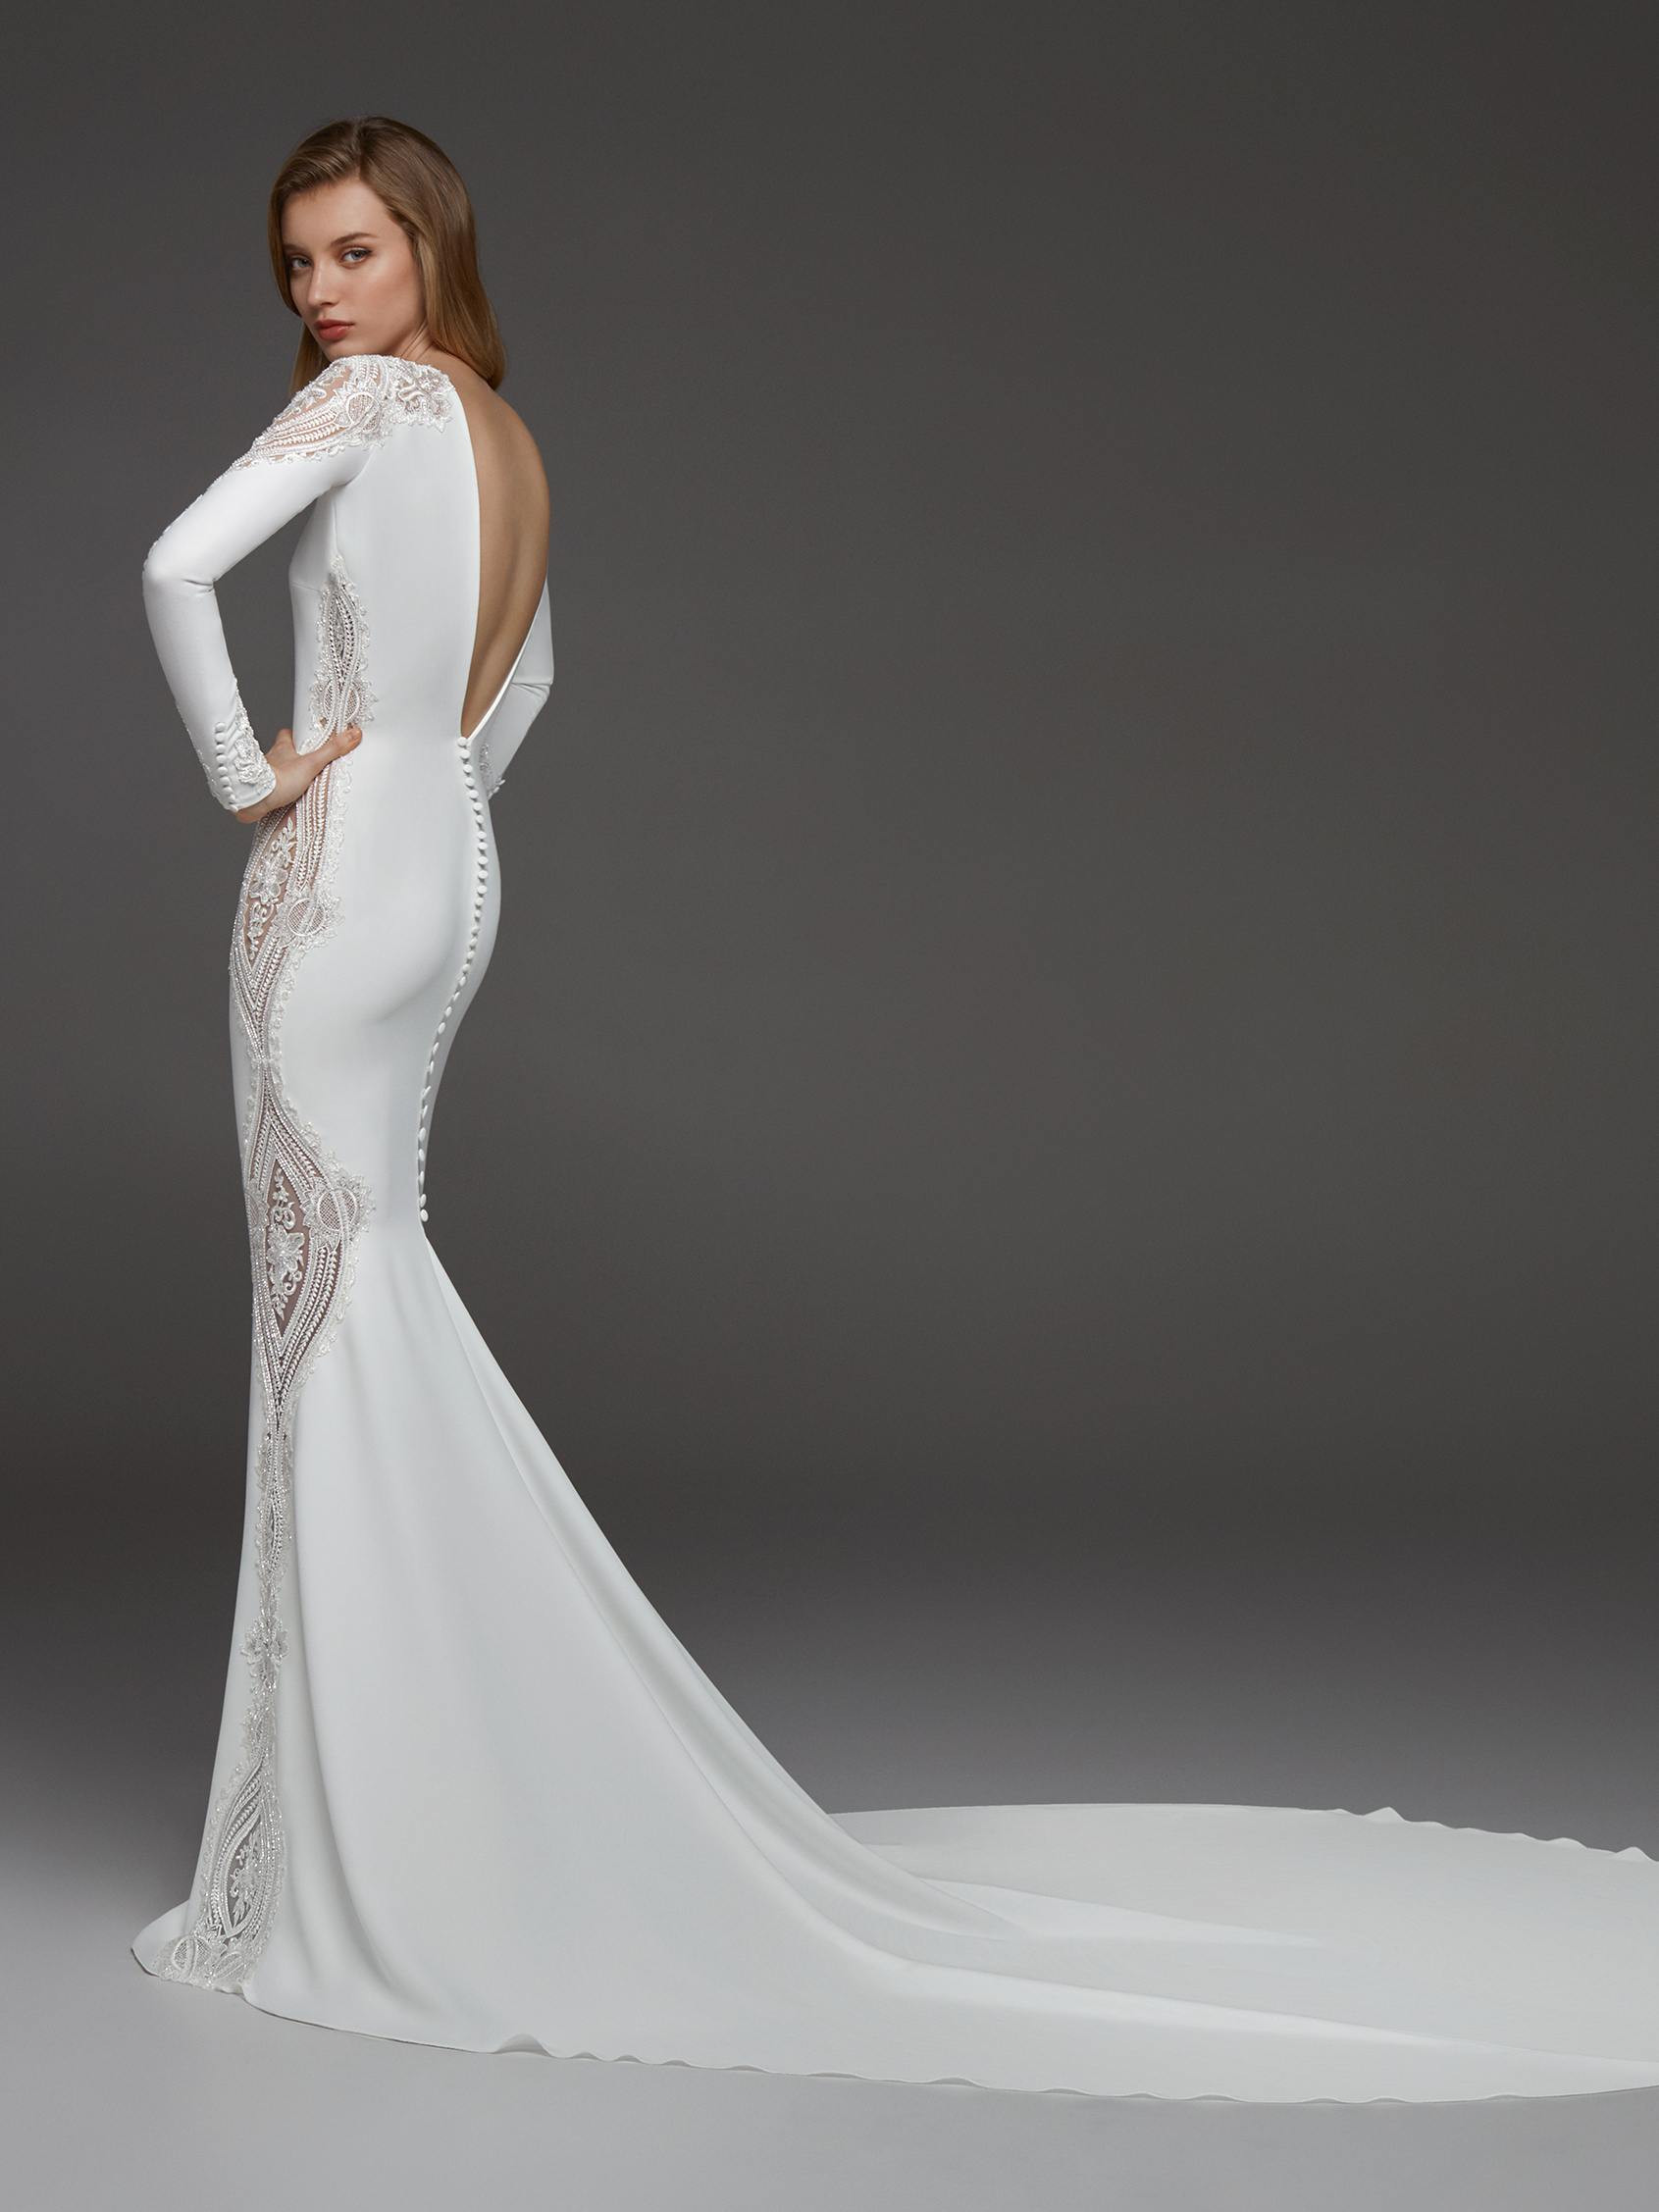 Womens sheath gown with long veil top knit